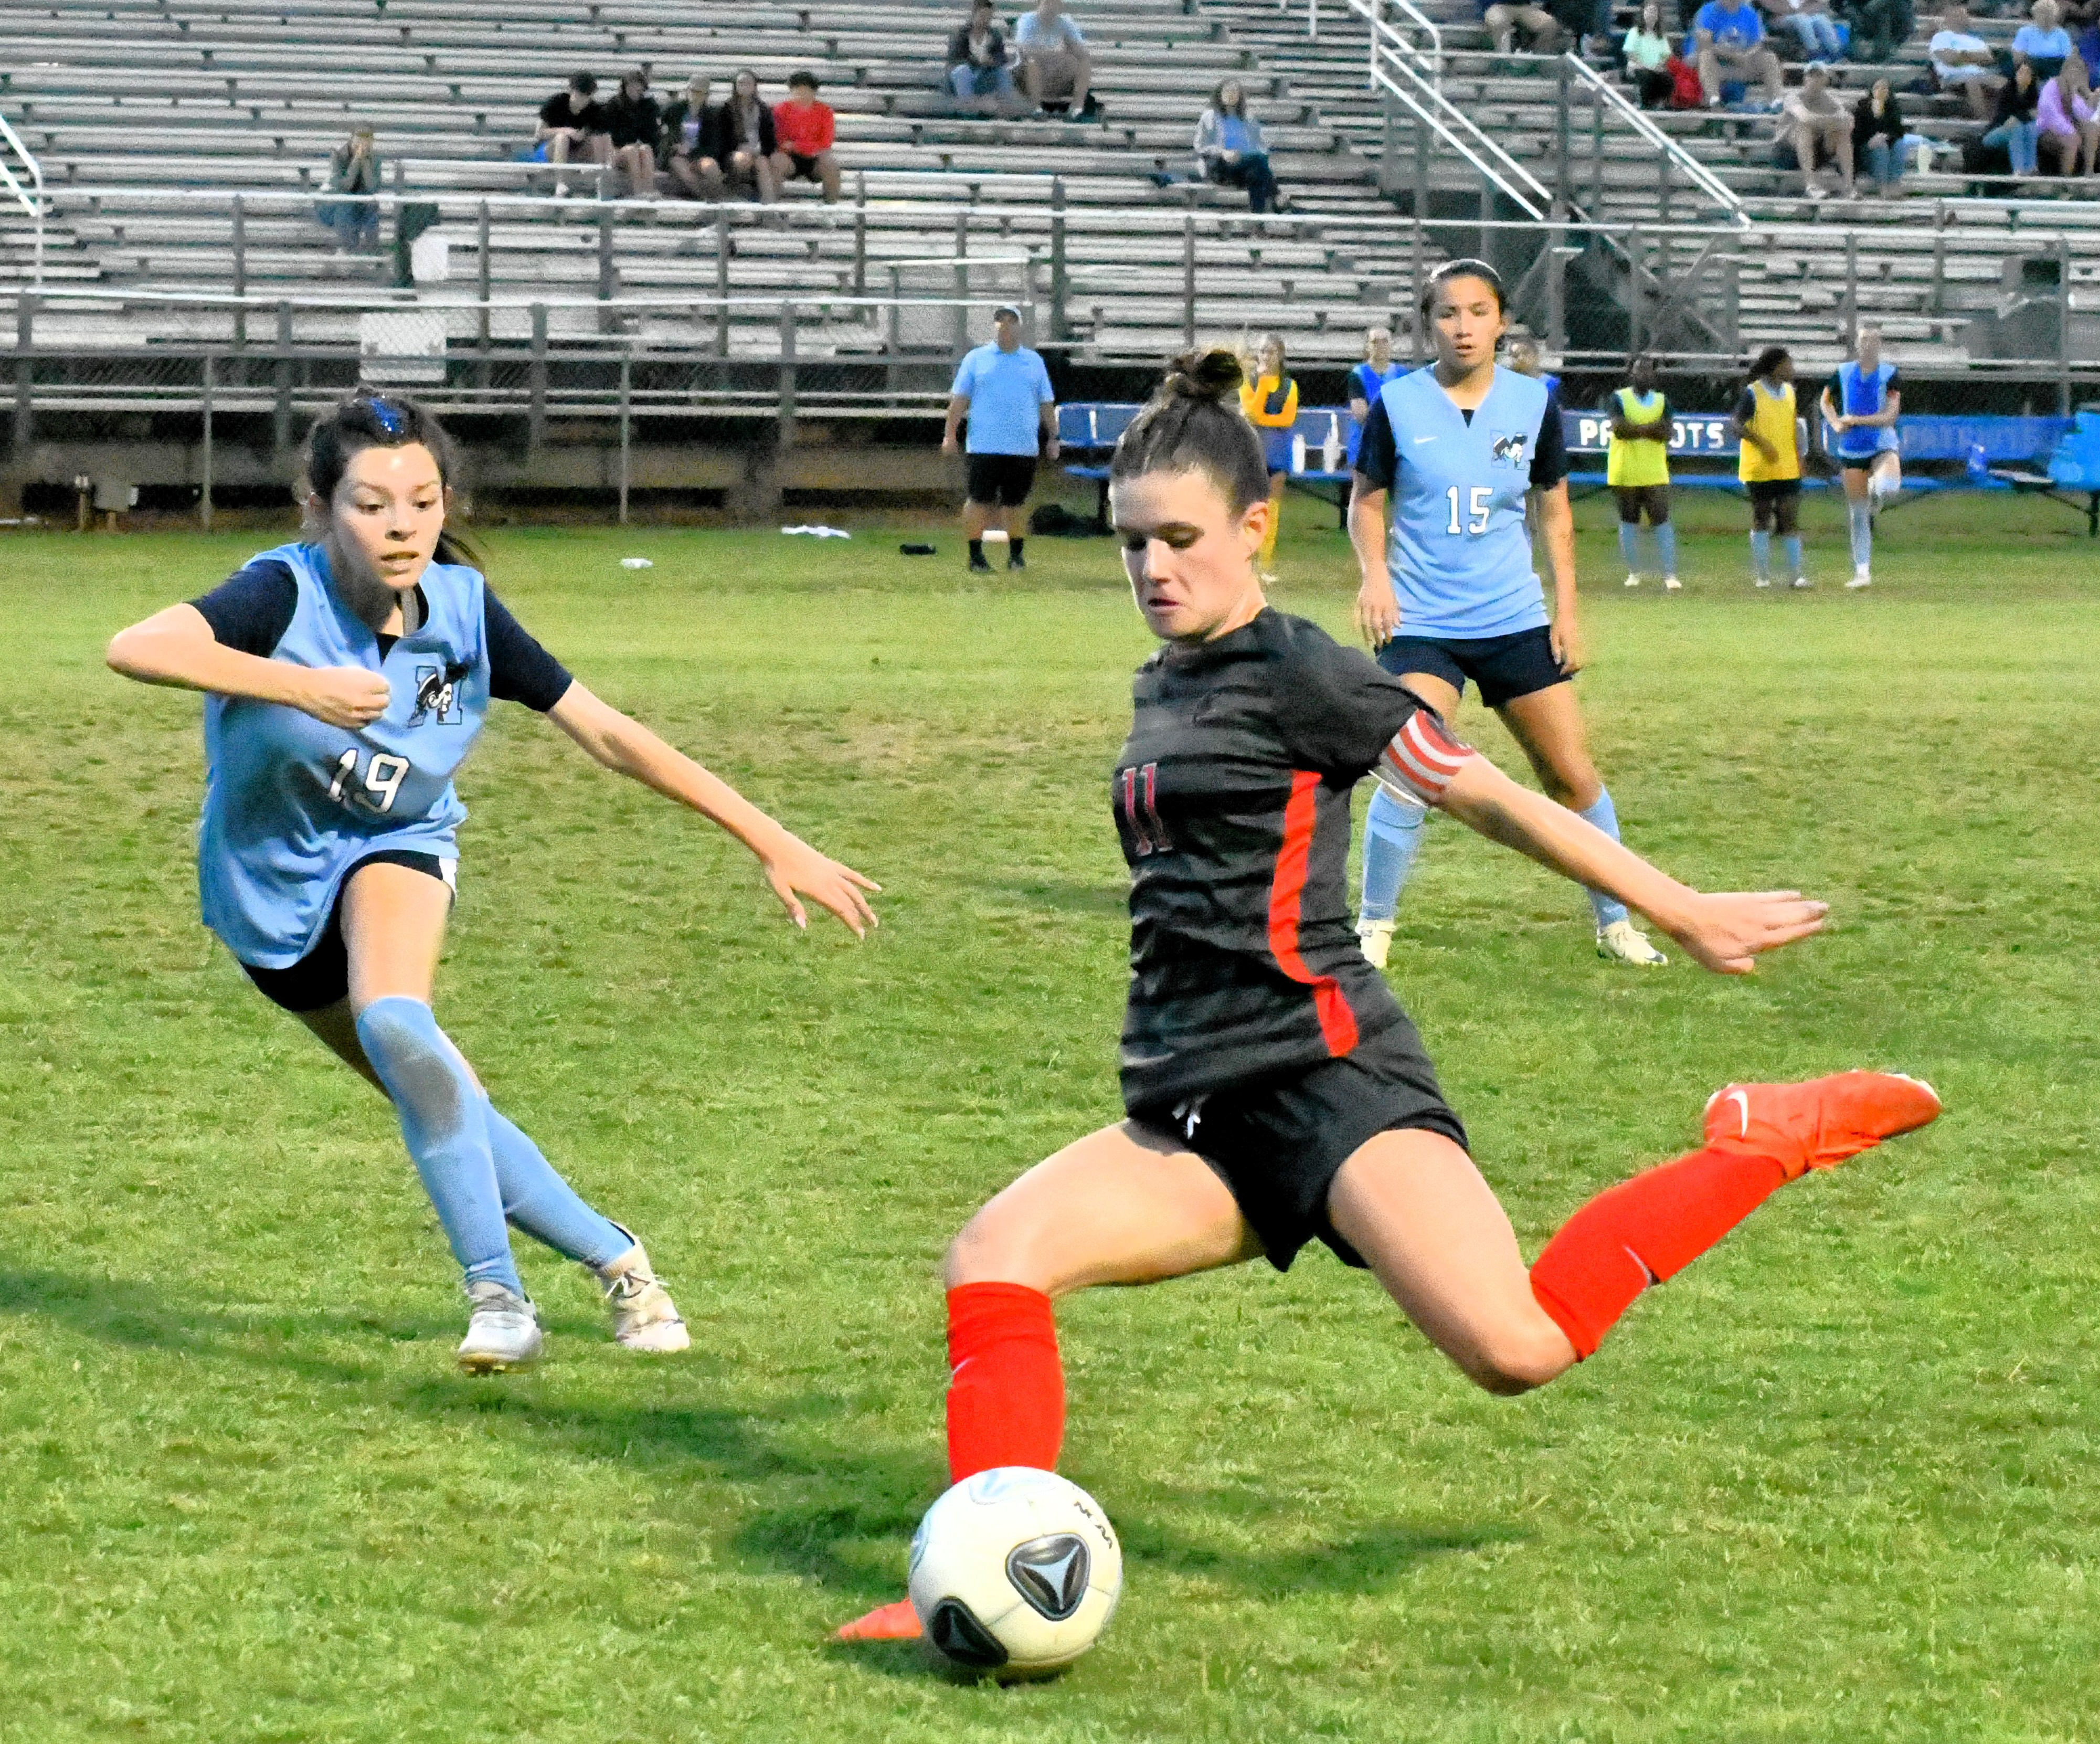 Two second half goals end Lady Falcons playoff run (May 4 Roundup)